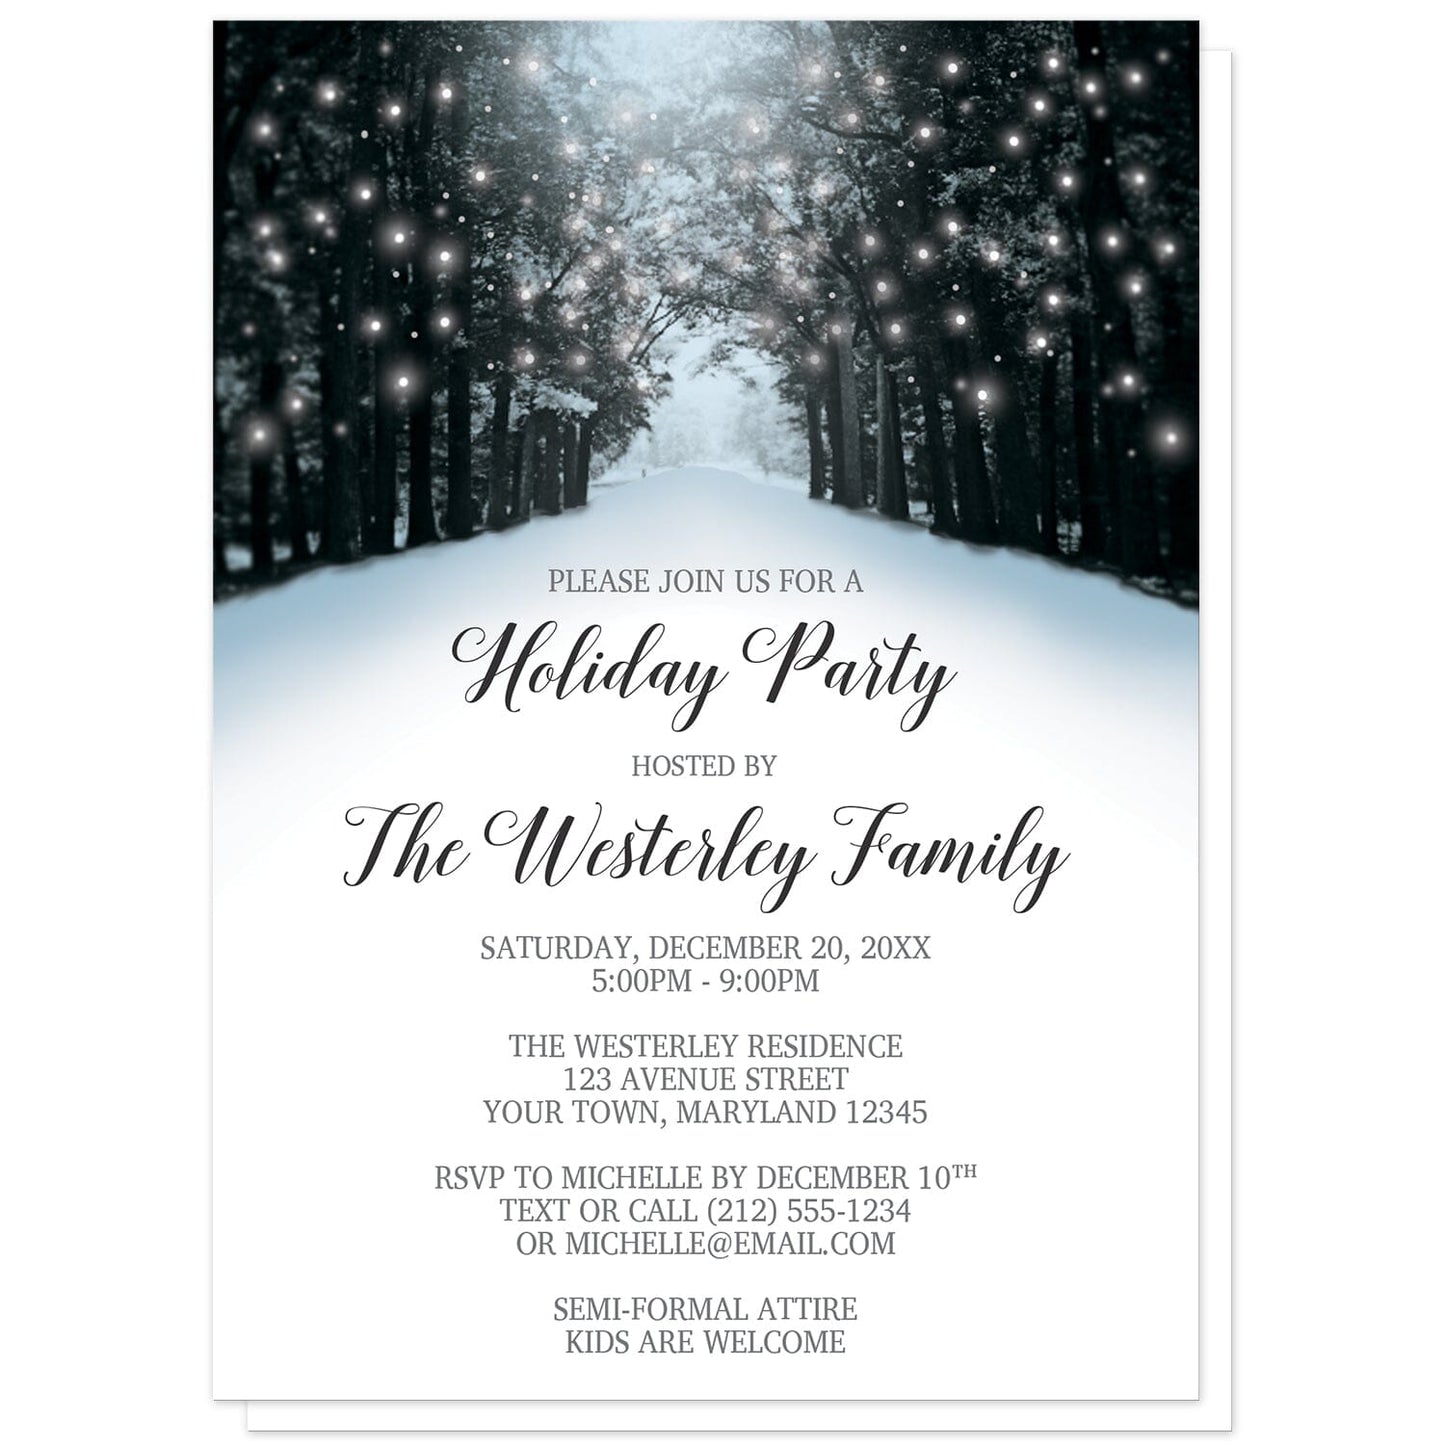 Snowy Winter Road Tree Lights Holiday Party Invitations at Artistically Invited. Beautiful invites with a snowy tree lined road filled with white holiday lights. These Christmas invitations are designed in a blue, black, and gray winter color scheme. The winter wonderland theme on these invitations is modern with a magical feeling. Anyone who loves Christmas lights will fall in love with these snowy winter road tree lights holiday party invitations for your personal or office holiday celebration.